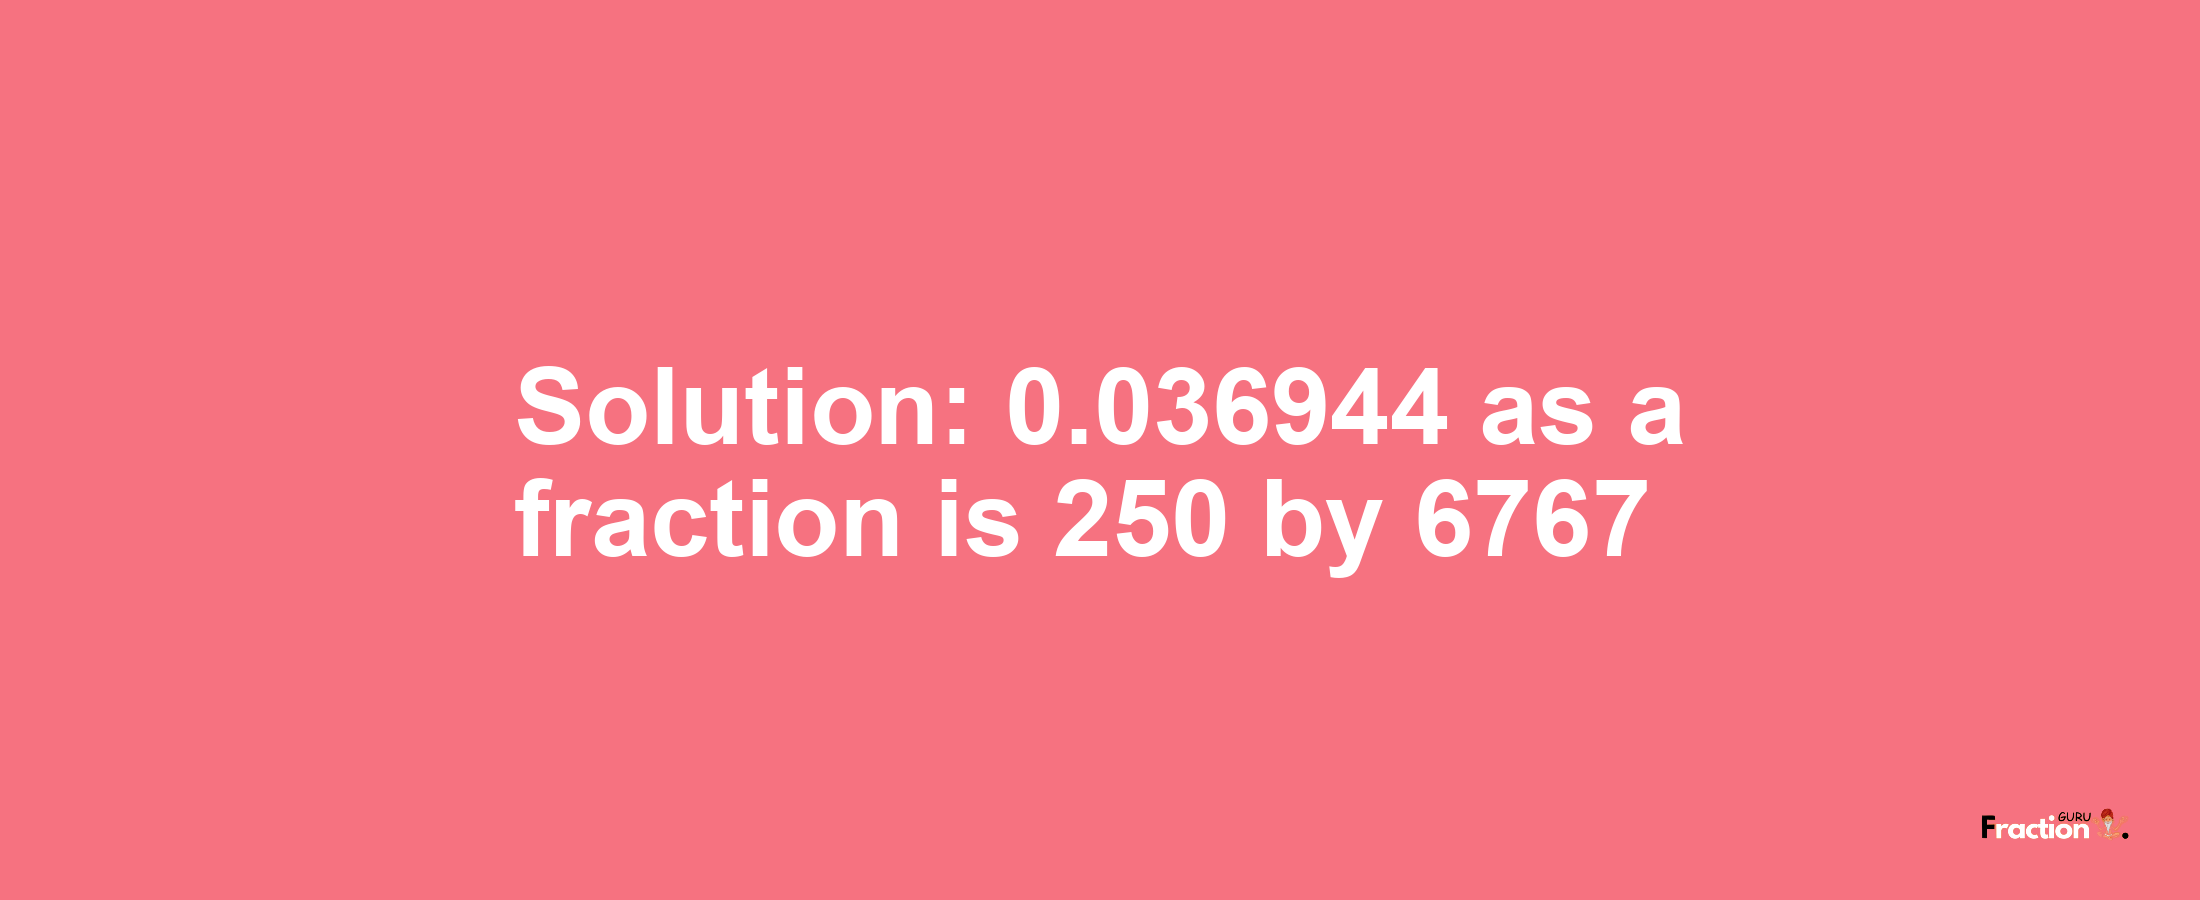 Solution:0.036944 as a fraction is 250/6767